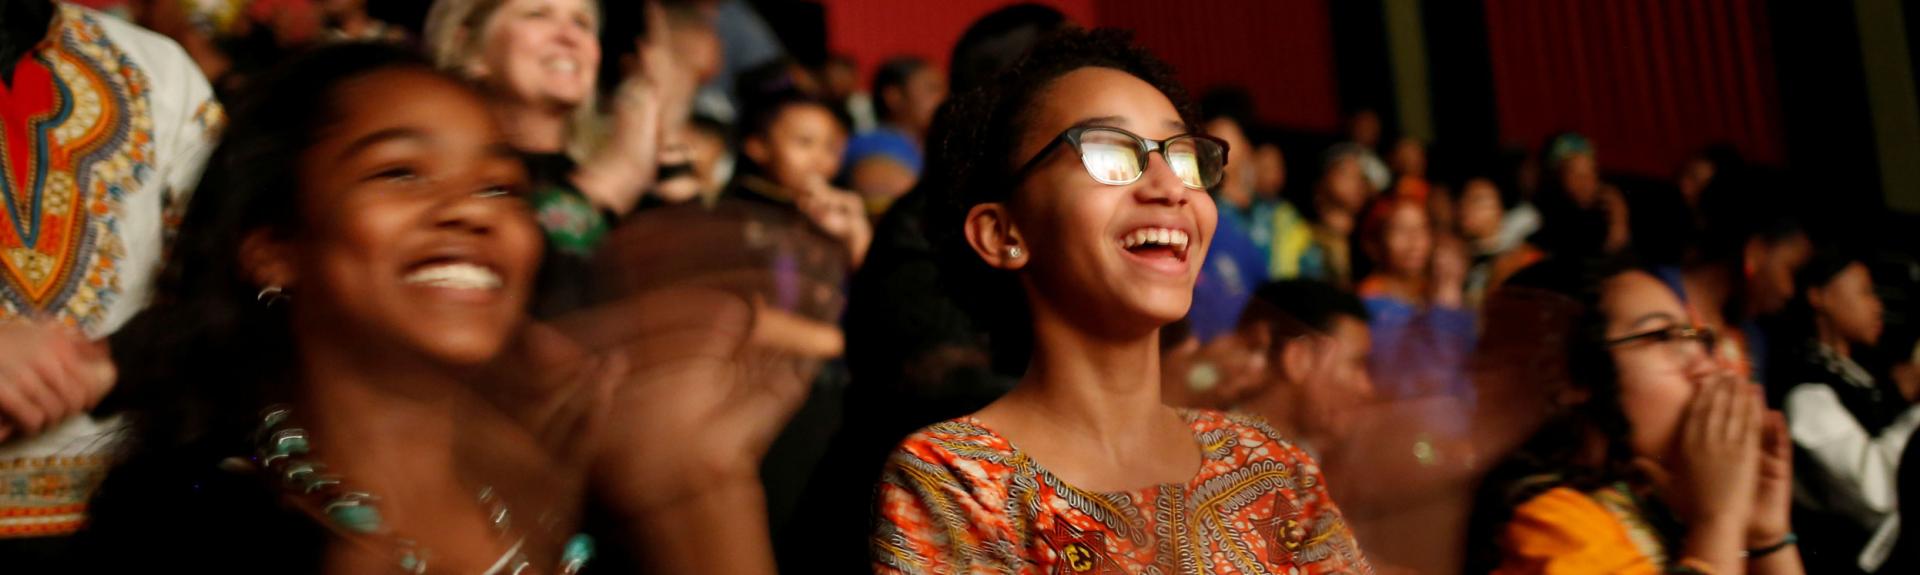 Audience clapping in excitement during Black Panther screening